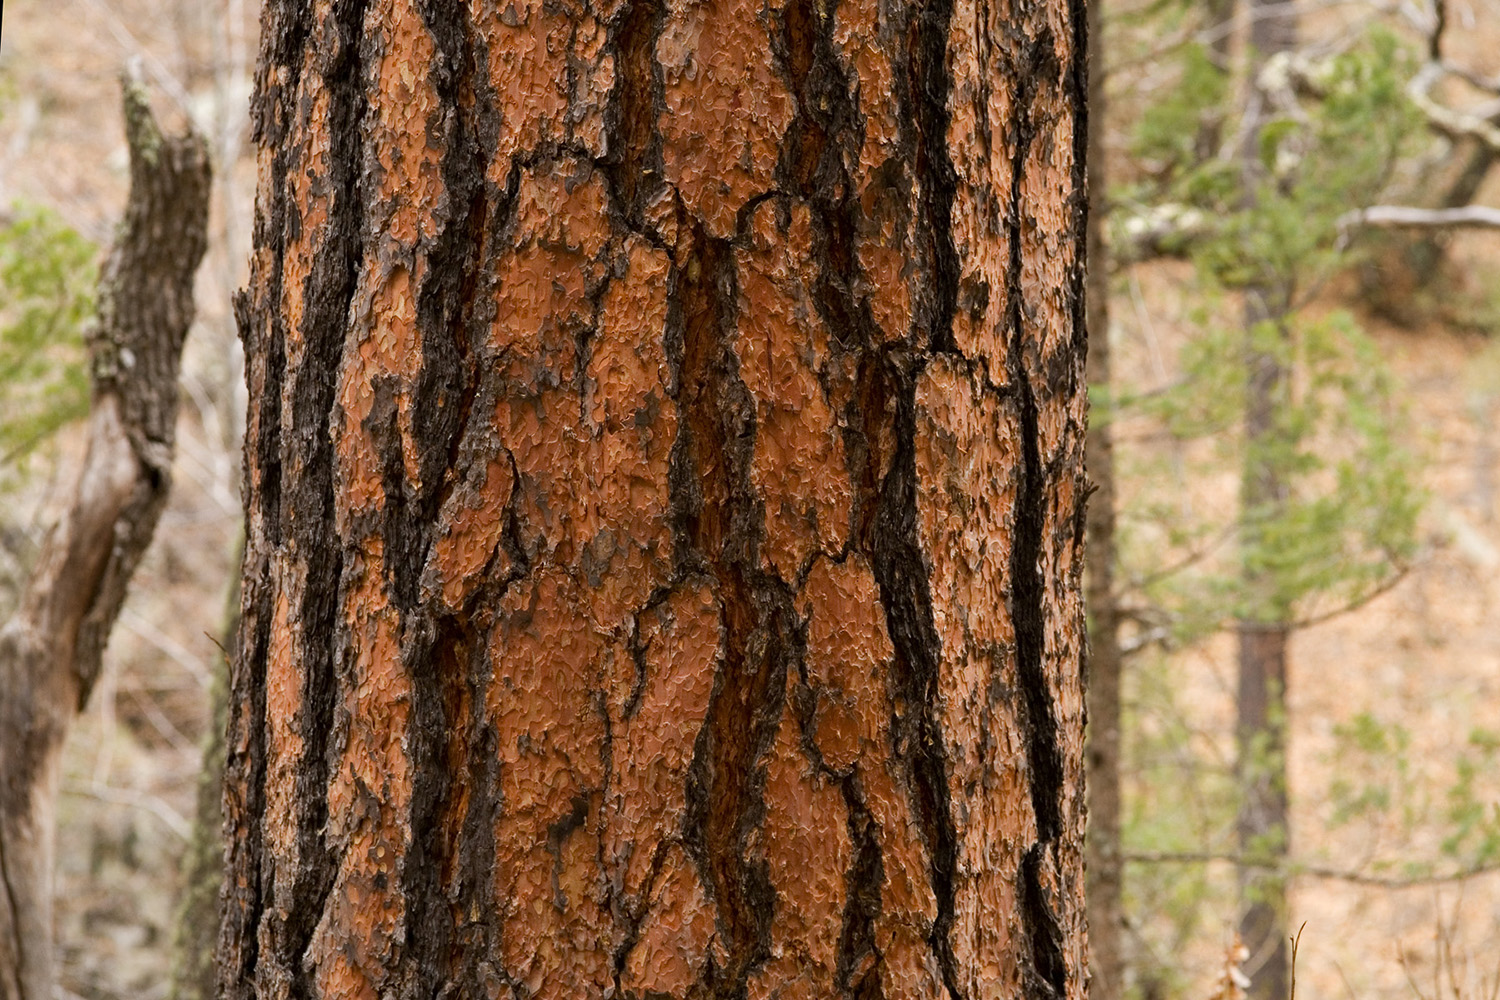 Broad plates and black lines in the characteristic bark of an older Ponderosa